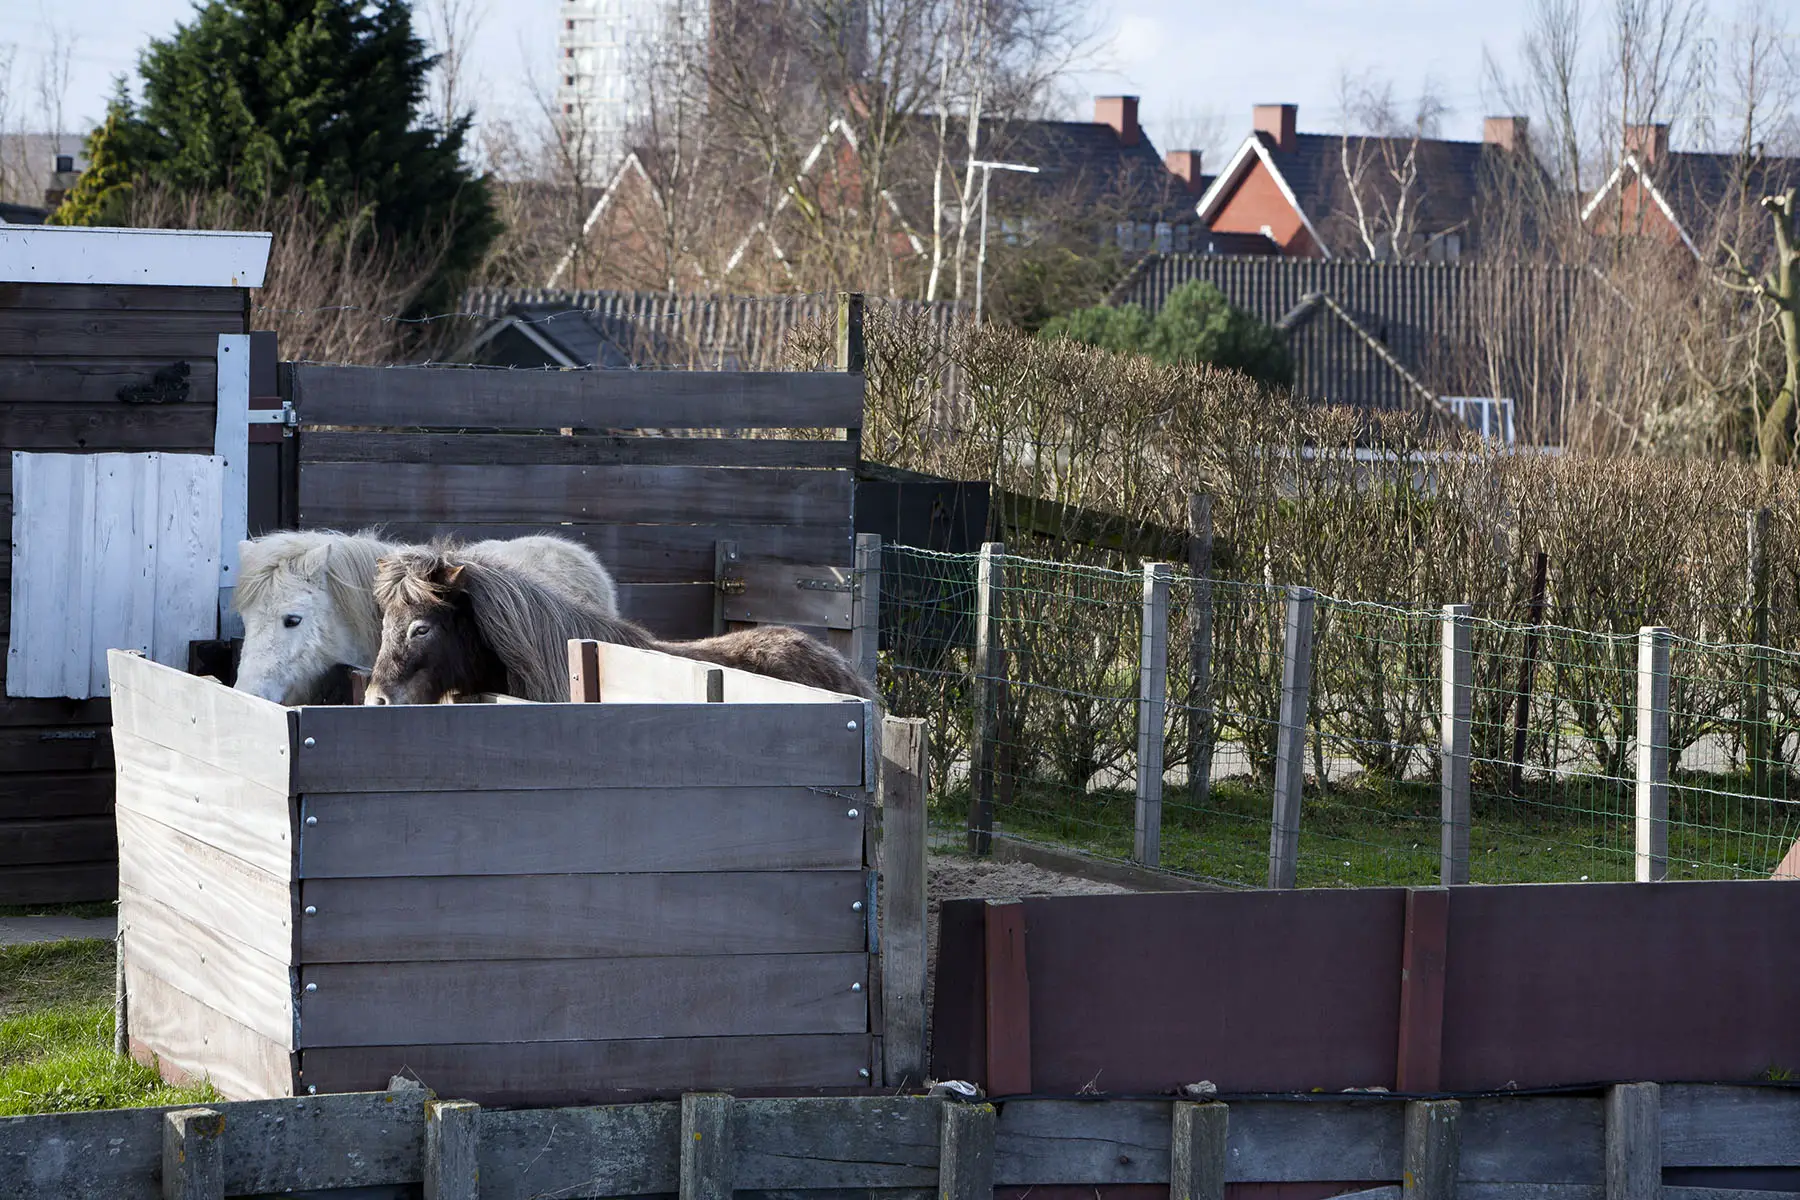 One brown and one white pony standing outside a tiny stable in a residential district.